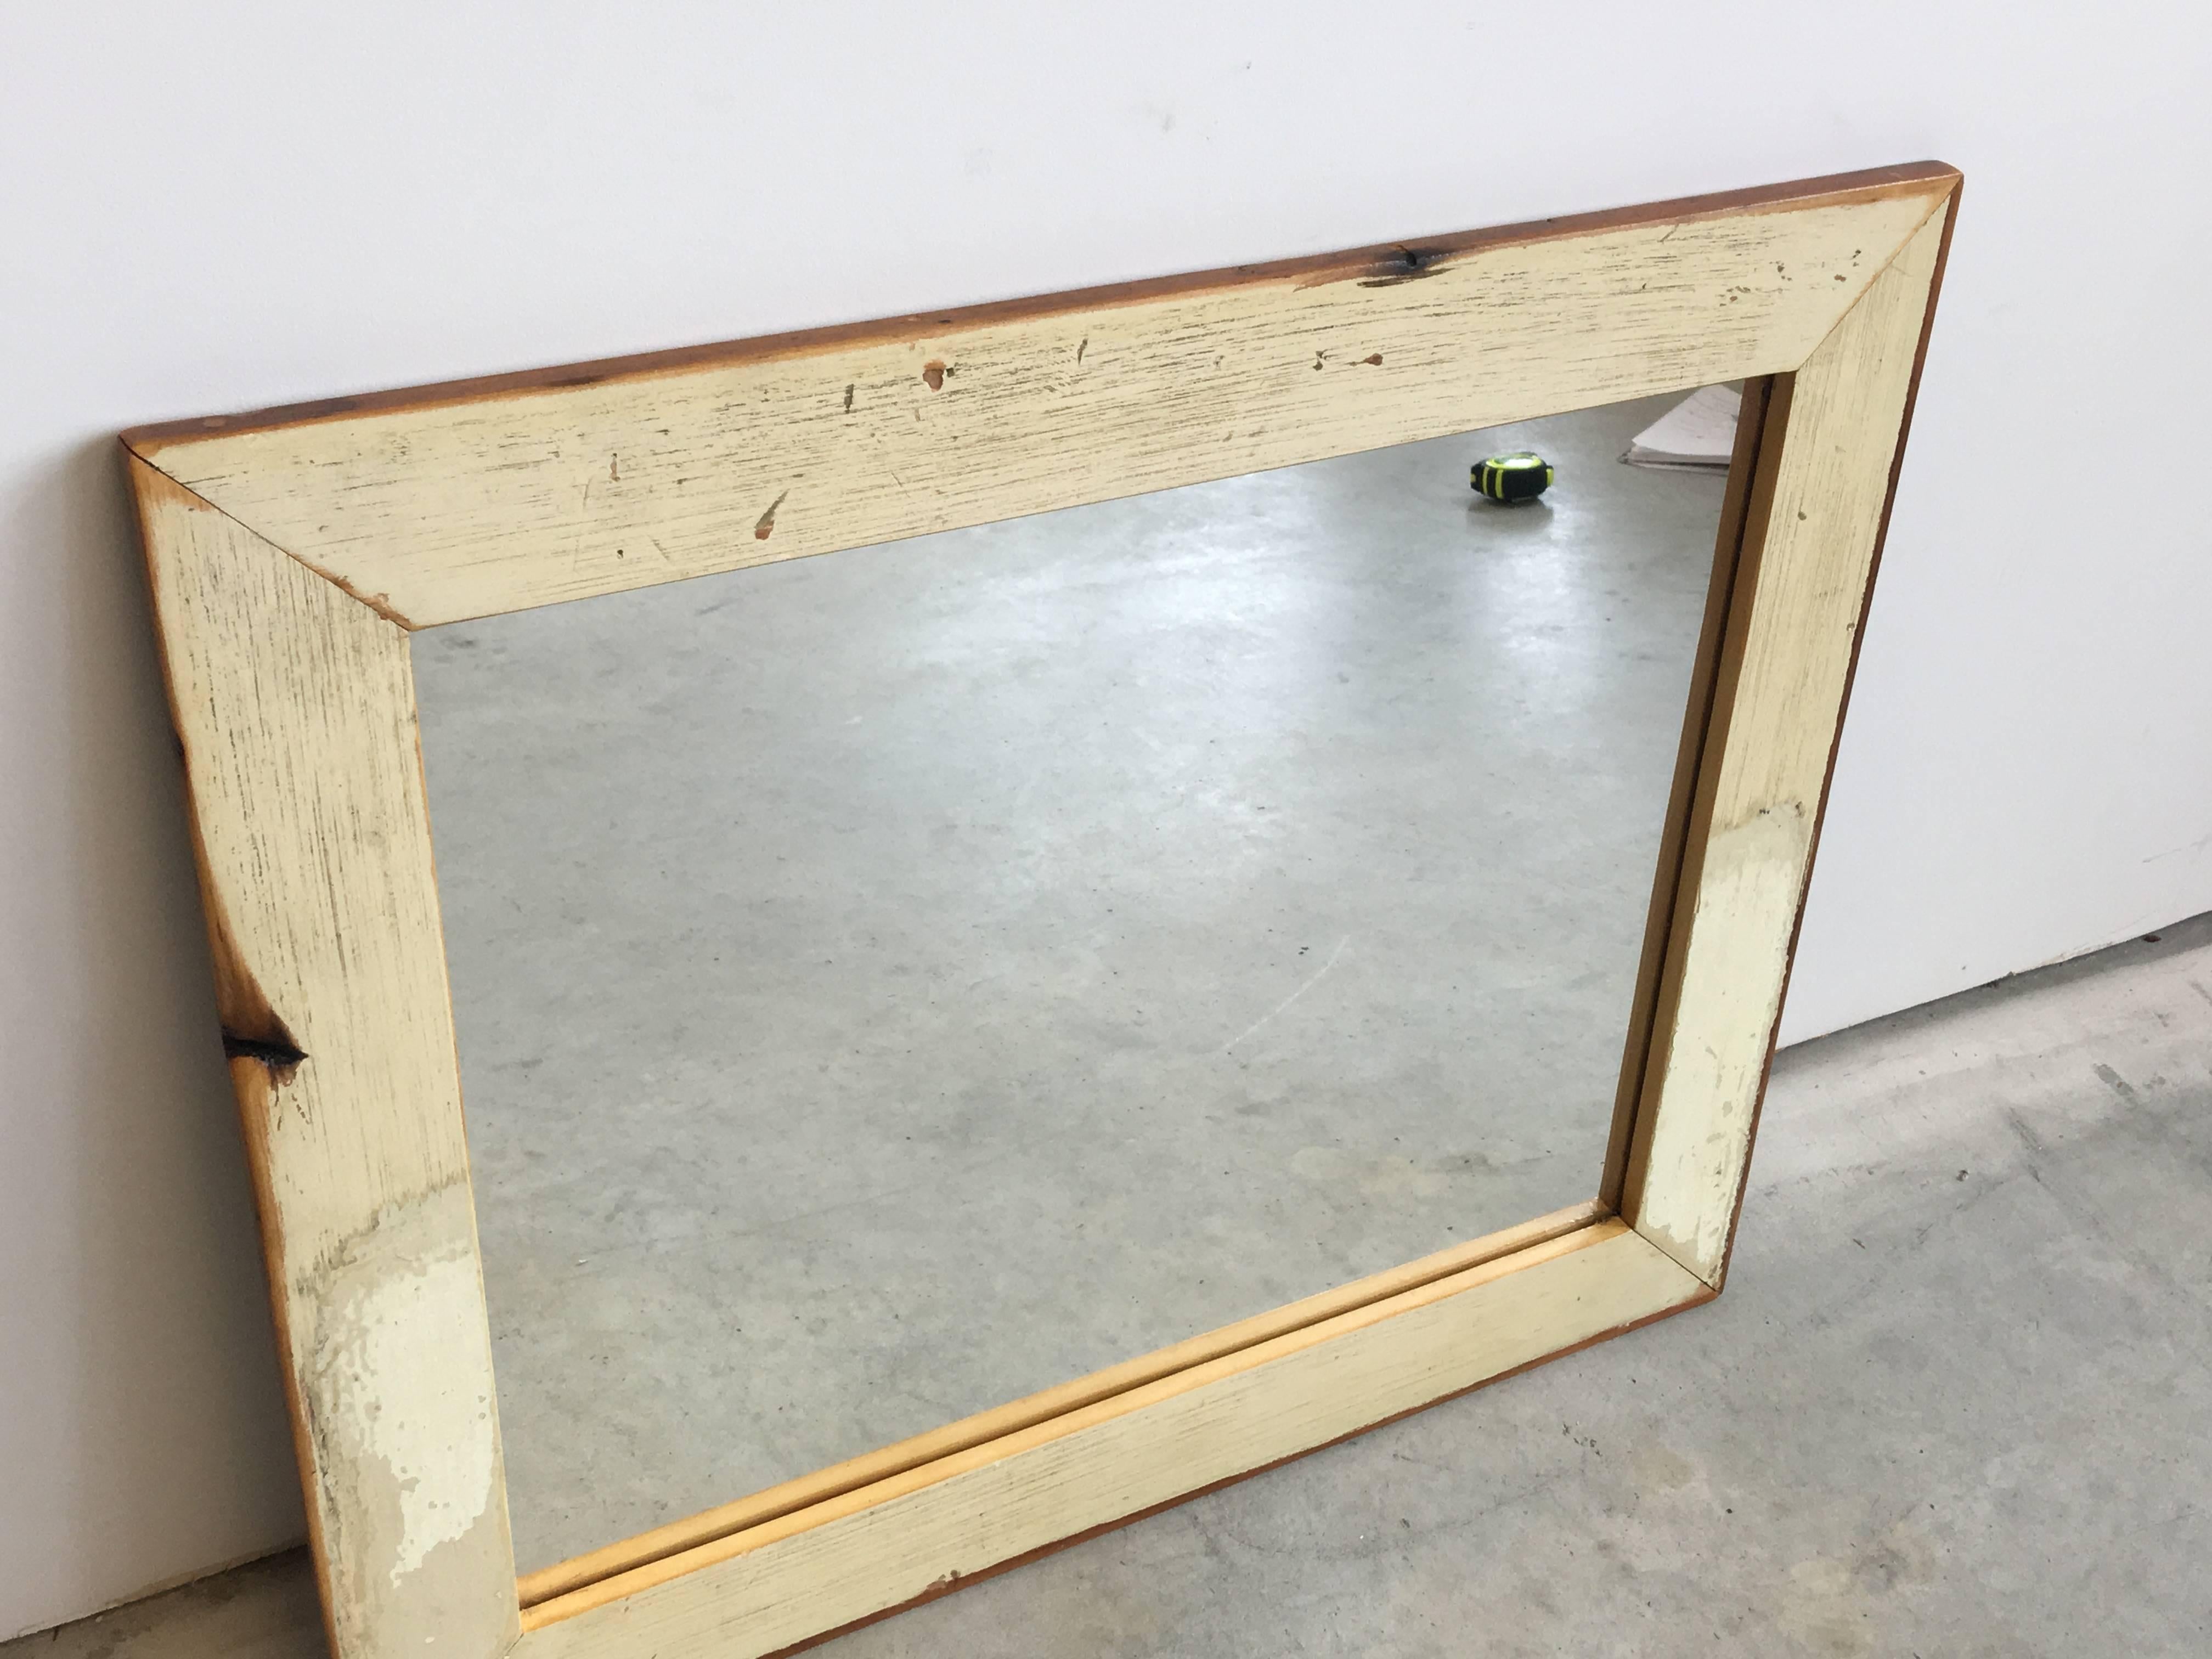 Offered is a stunning, local Richmond, Virginia artists repurposed antique white-washed wood mirror, by Alleywood Studios. A truly immaculate and sturdy piece. Hangs horizontal or vertical.